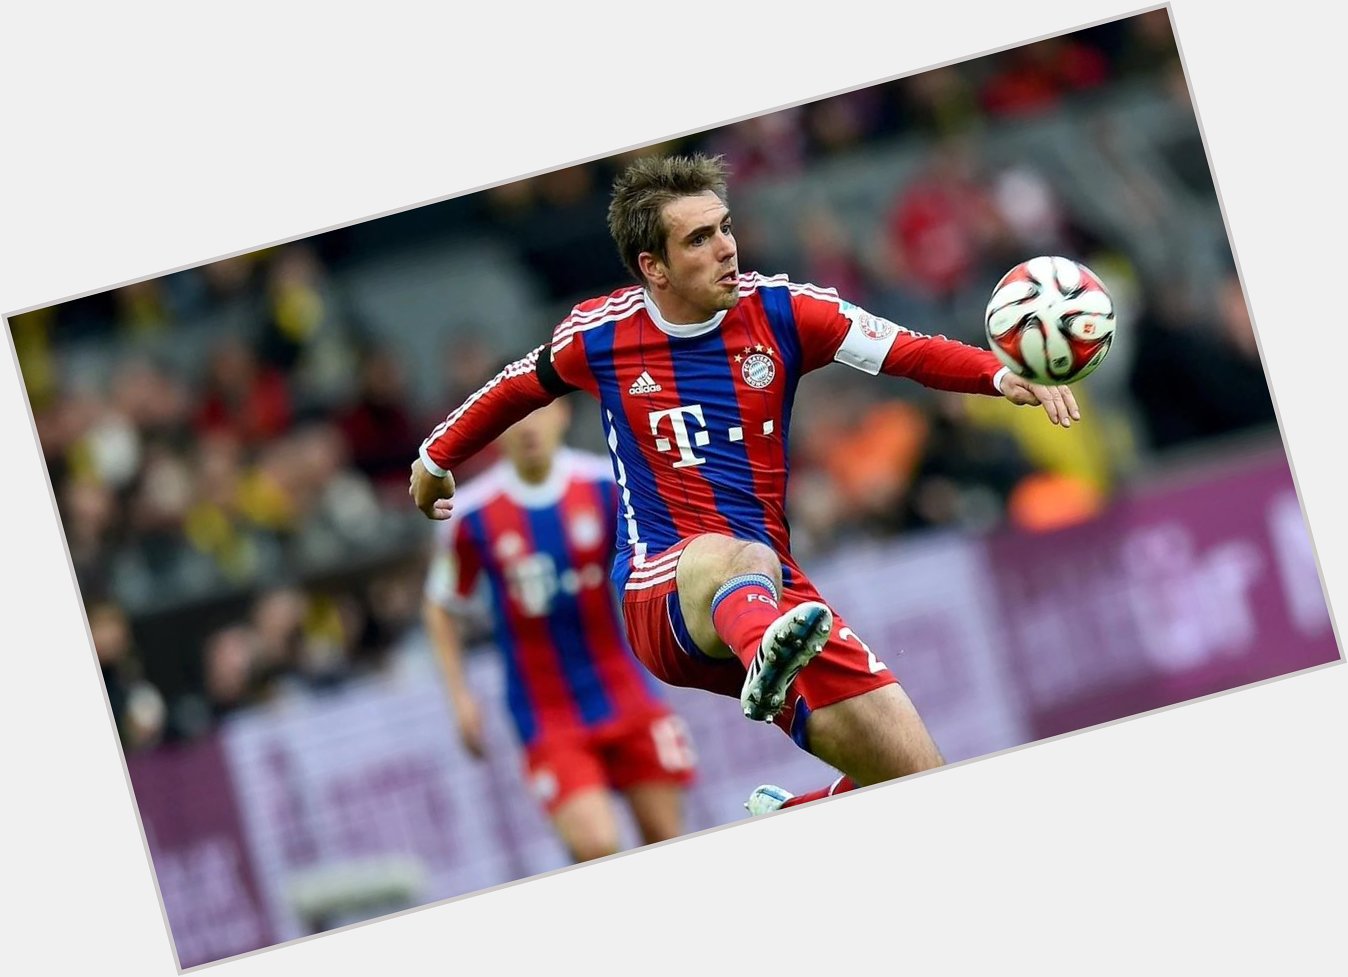 The most essential quality in the game is passion -- Philipp Lahm

Happy Birthday Philipp Lahm! 